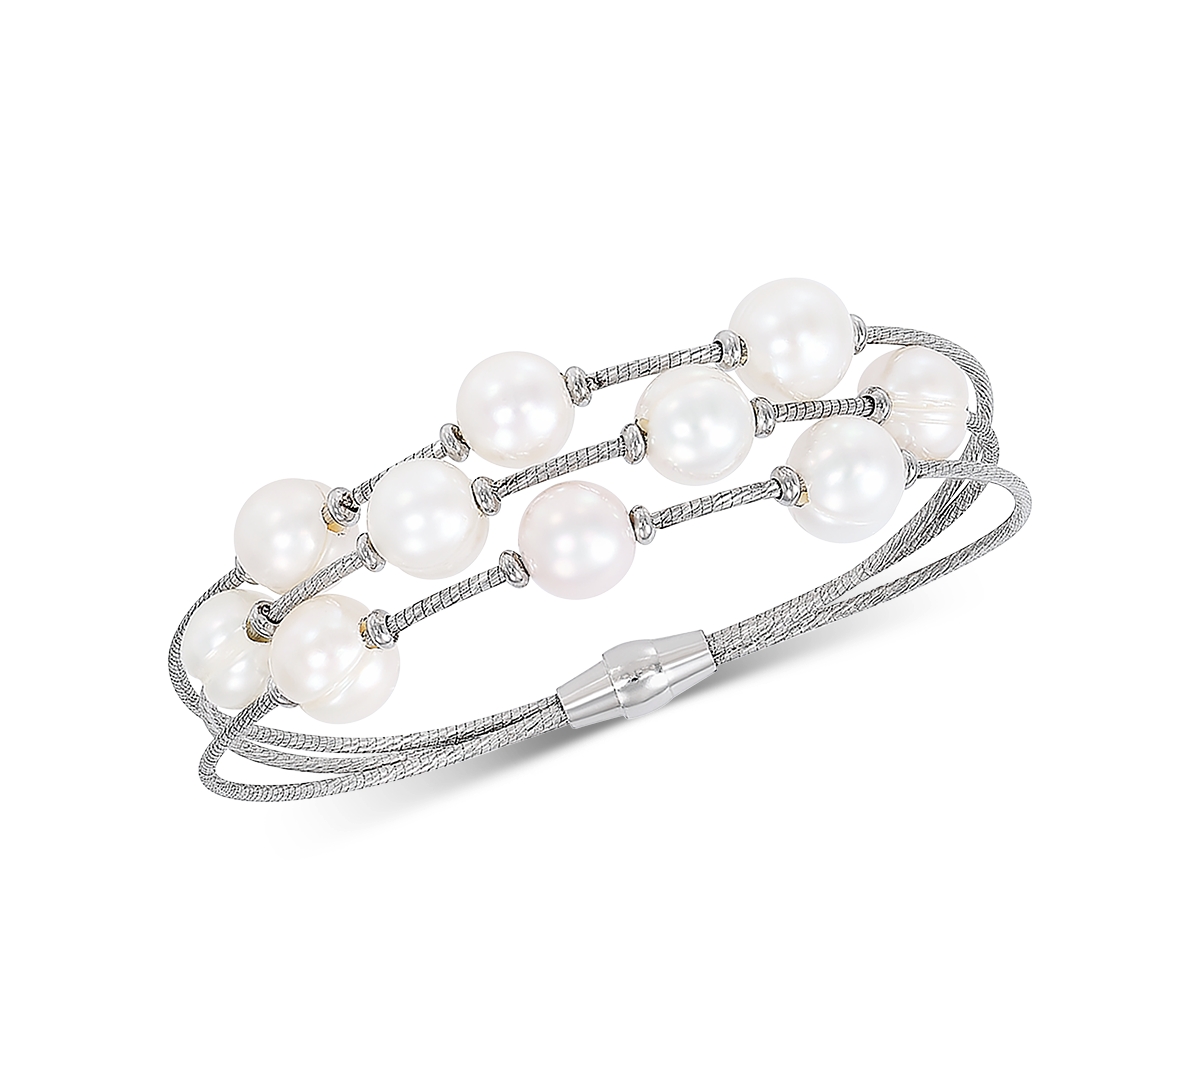 Cultured Freshwater Pearl (8-9mm) Bangle Bracelet in Sterling Silver - Silver